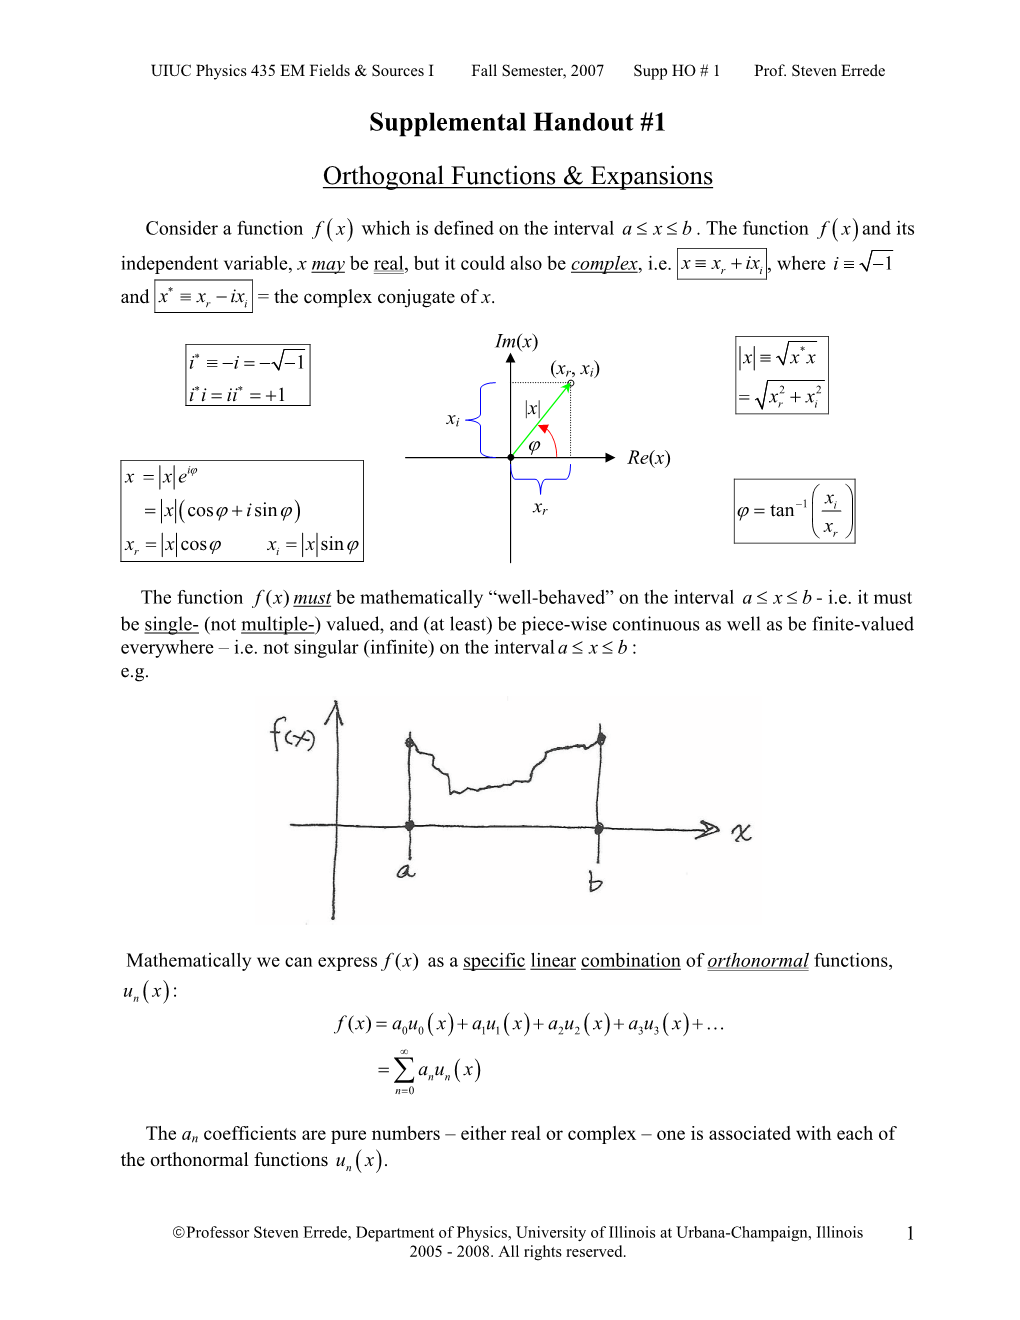 Supplemental Handout #1 Orthogonal Functions & Expansions